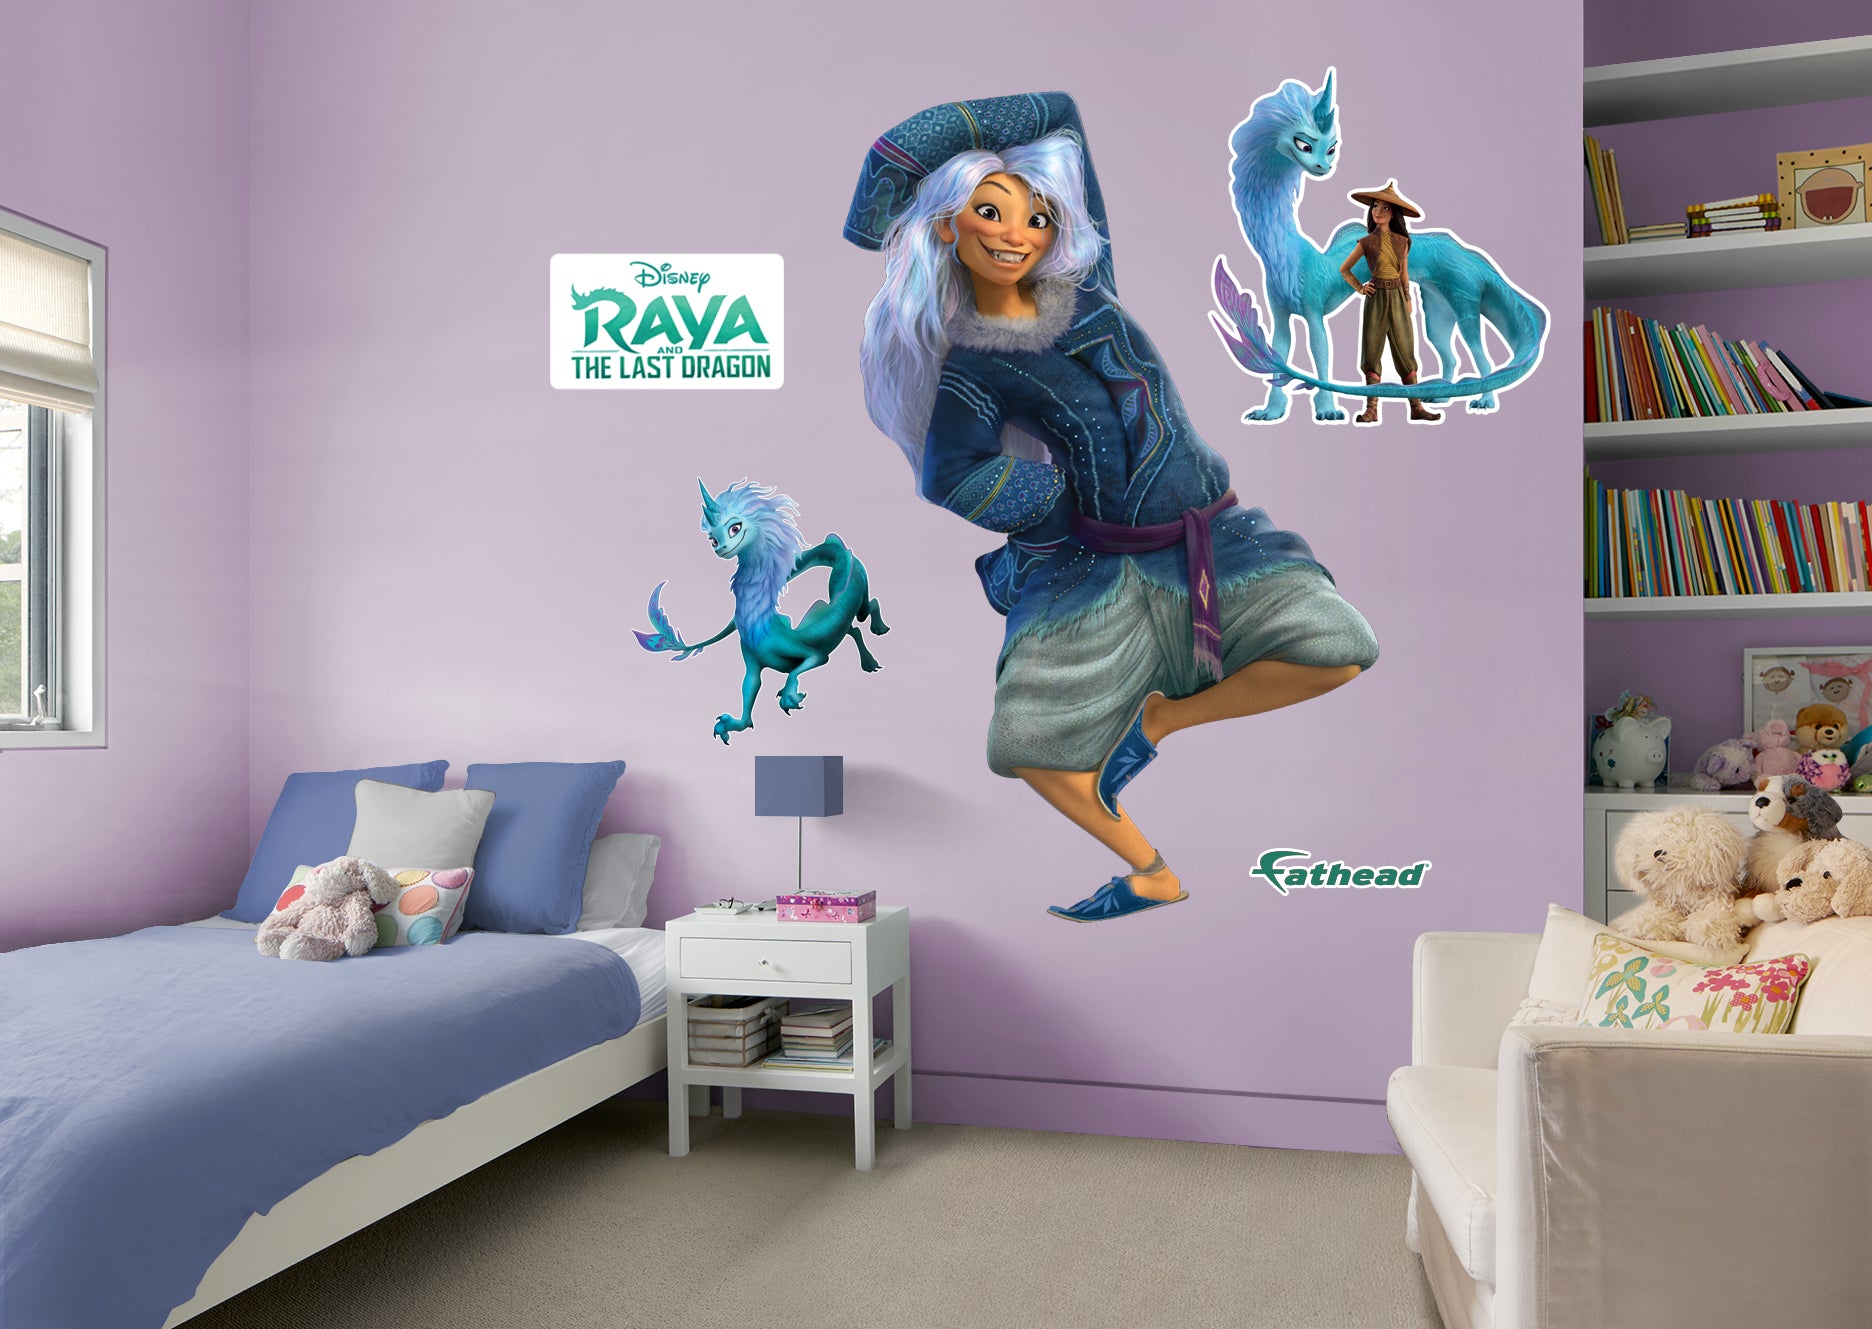 Raya and The Last Dragon Sisu Human Character RealBig - Officially Licensed Disney Removable Wall Decal Giant Character + 2 Deca